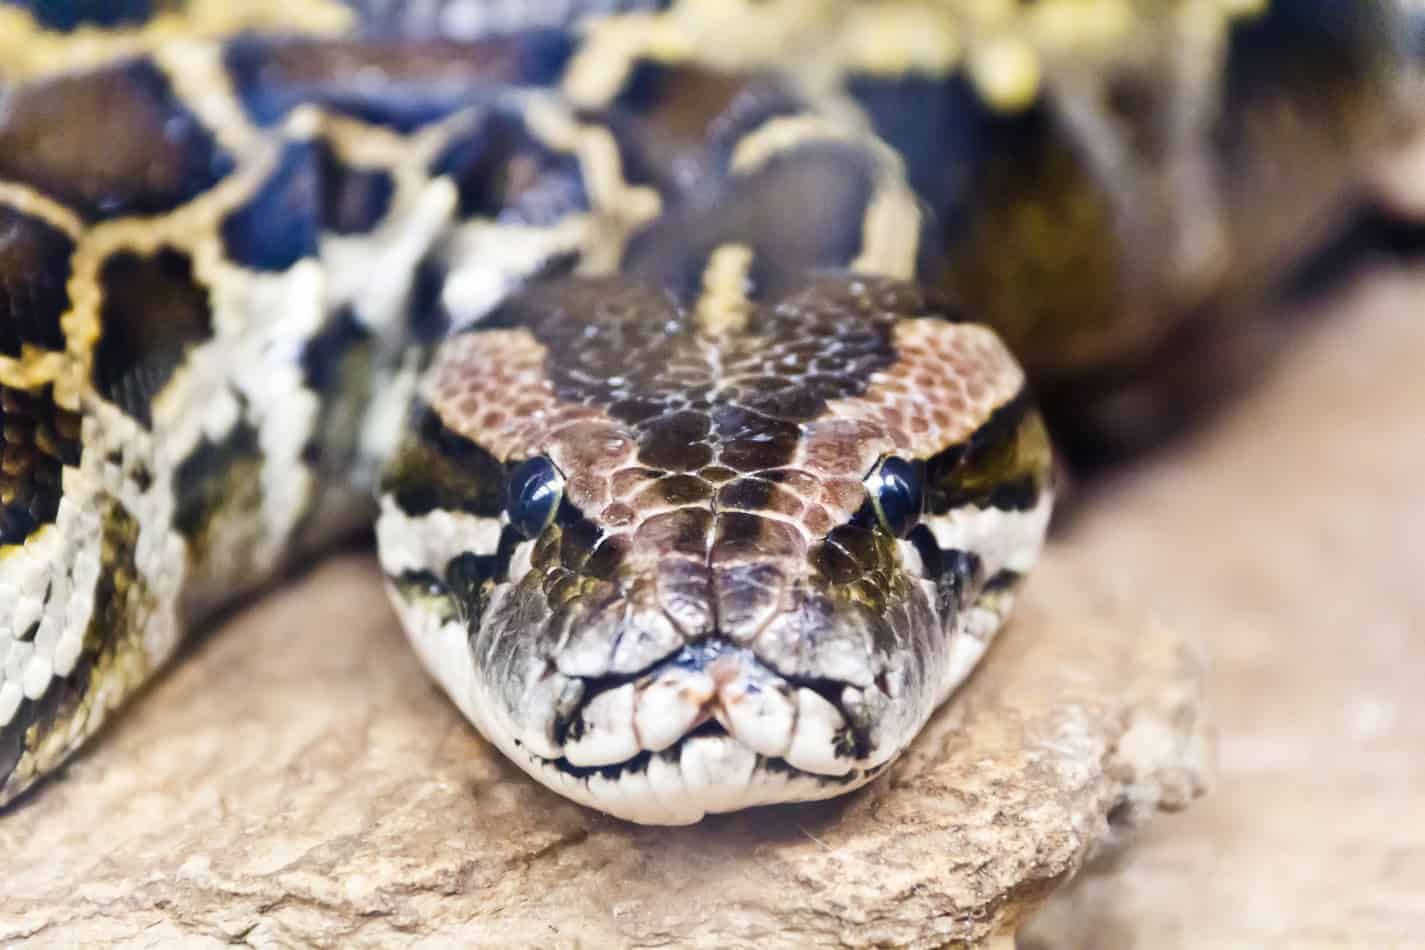 29 interesting facts about burmese pythons 5 29 Interesting Facts About Burmese Pythons (With Pictures)